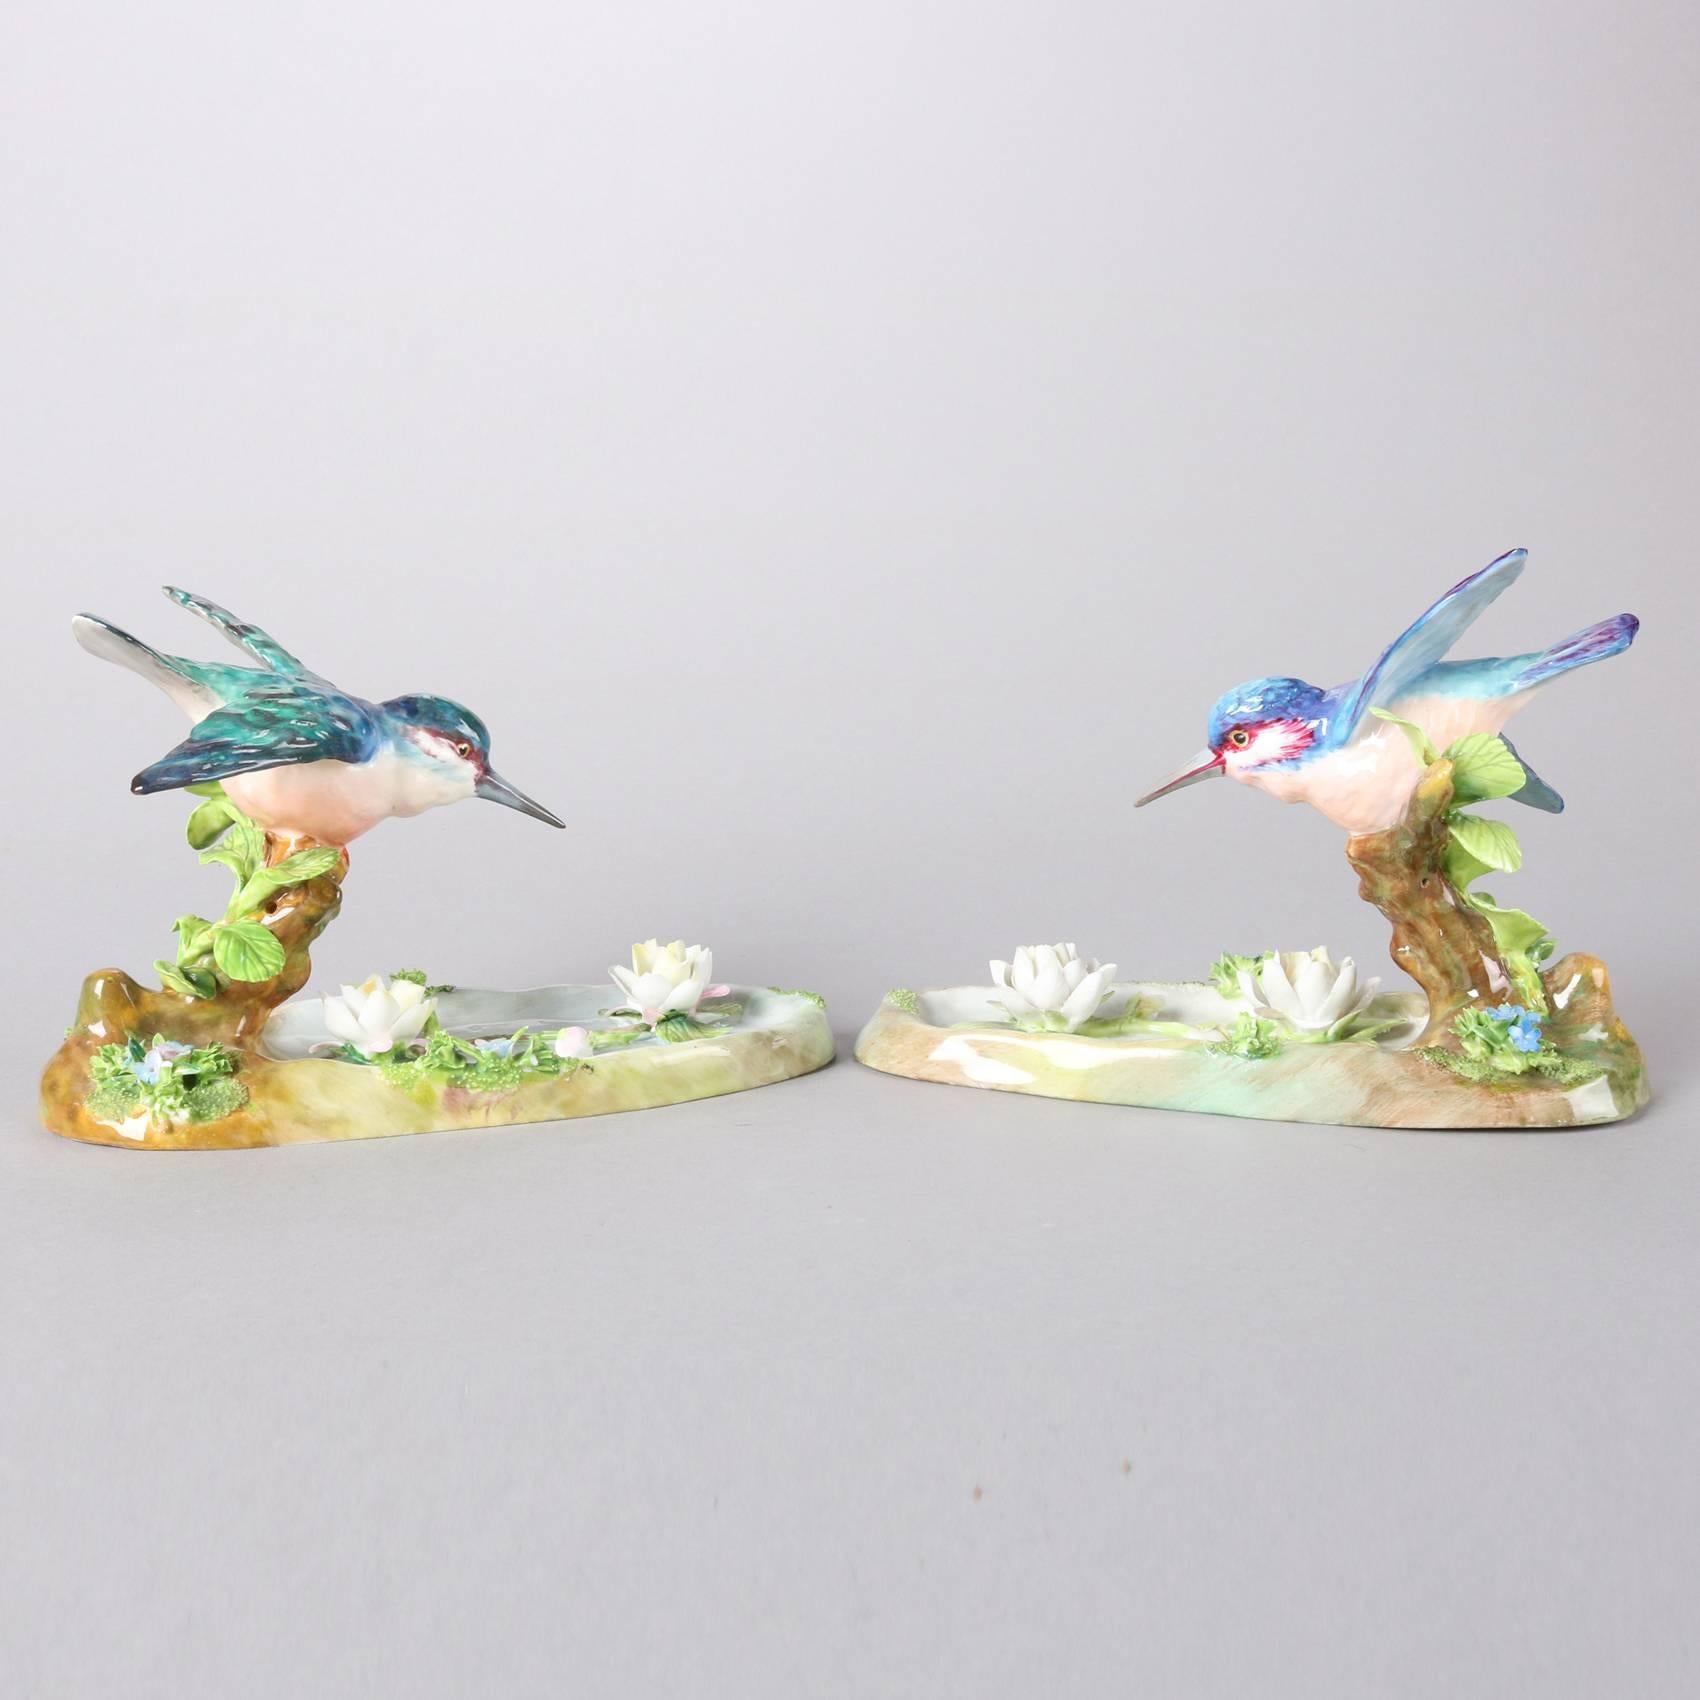 Pair of antique English Staffordshire hand painted porcelain King Fishers in flight by J. T. Jones, signed on bases, 20th century

Measure: 5" H x 7.75" W x 8.5" D.